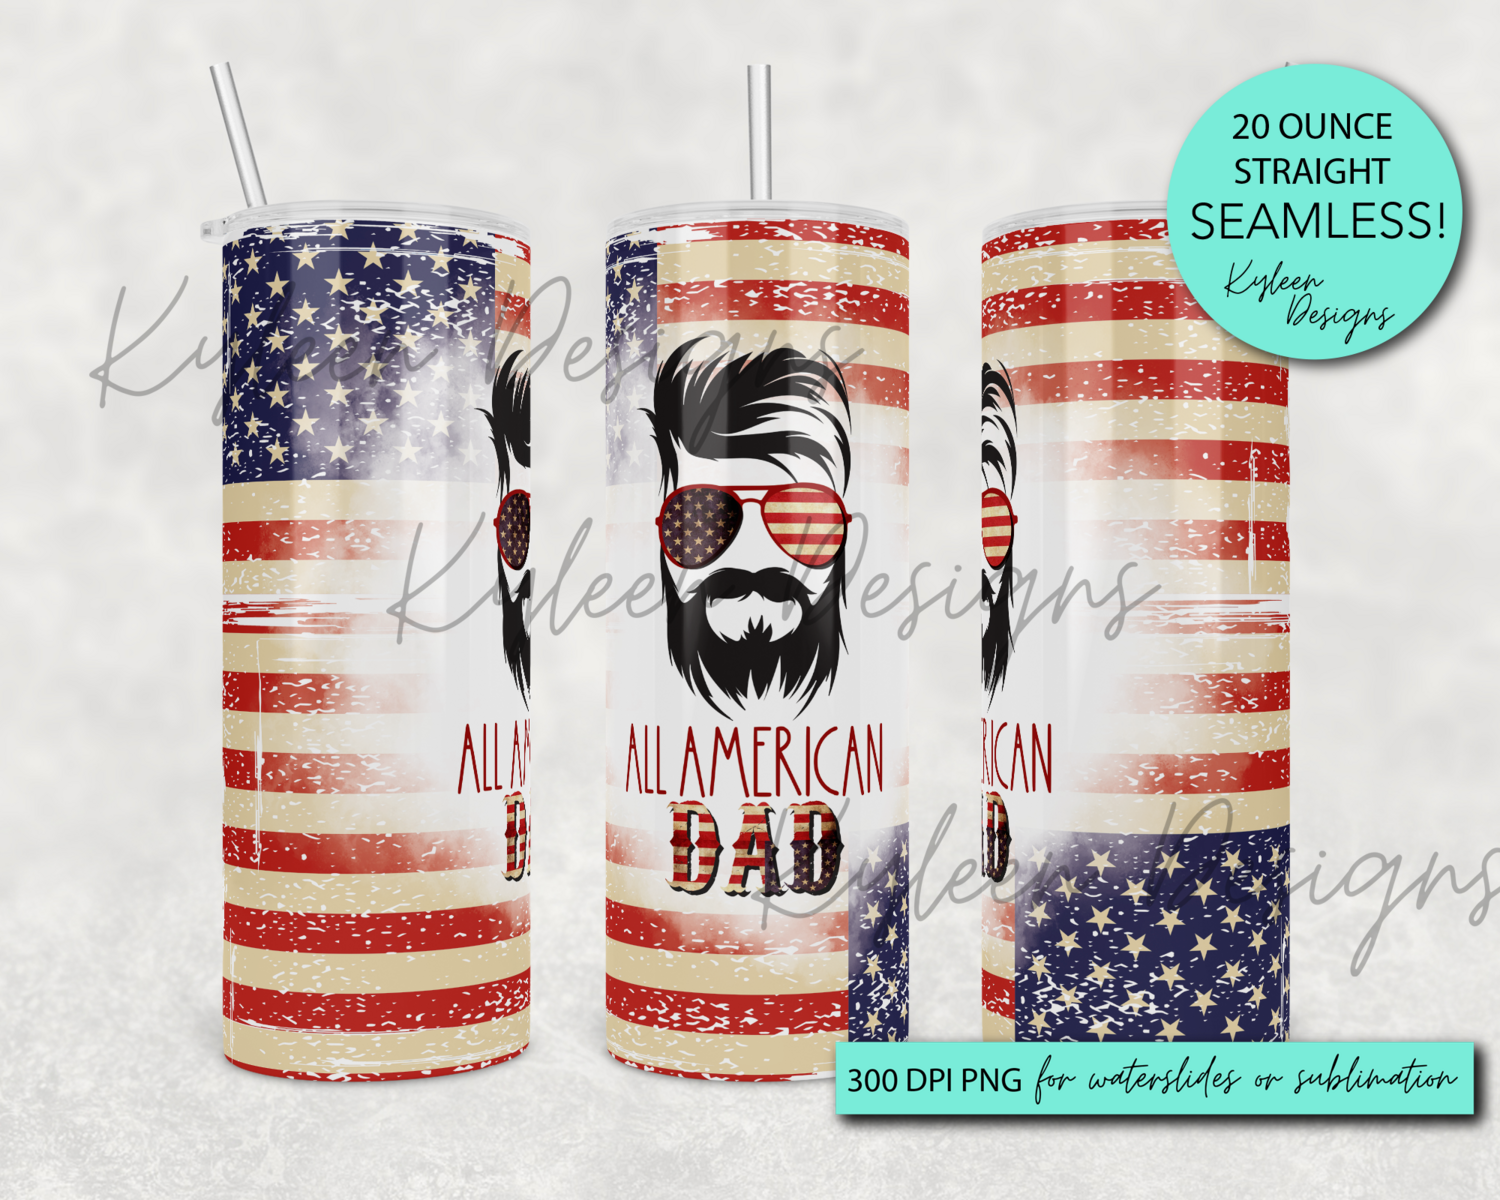 20 ounce straight All American DAD with beard wrap for sublimation, waterslide High res PNG digital file